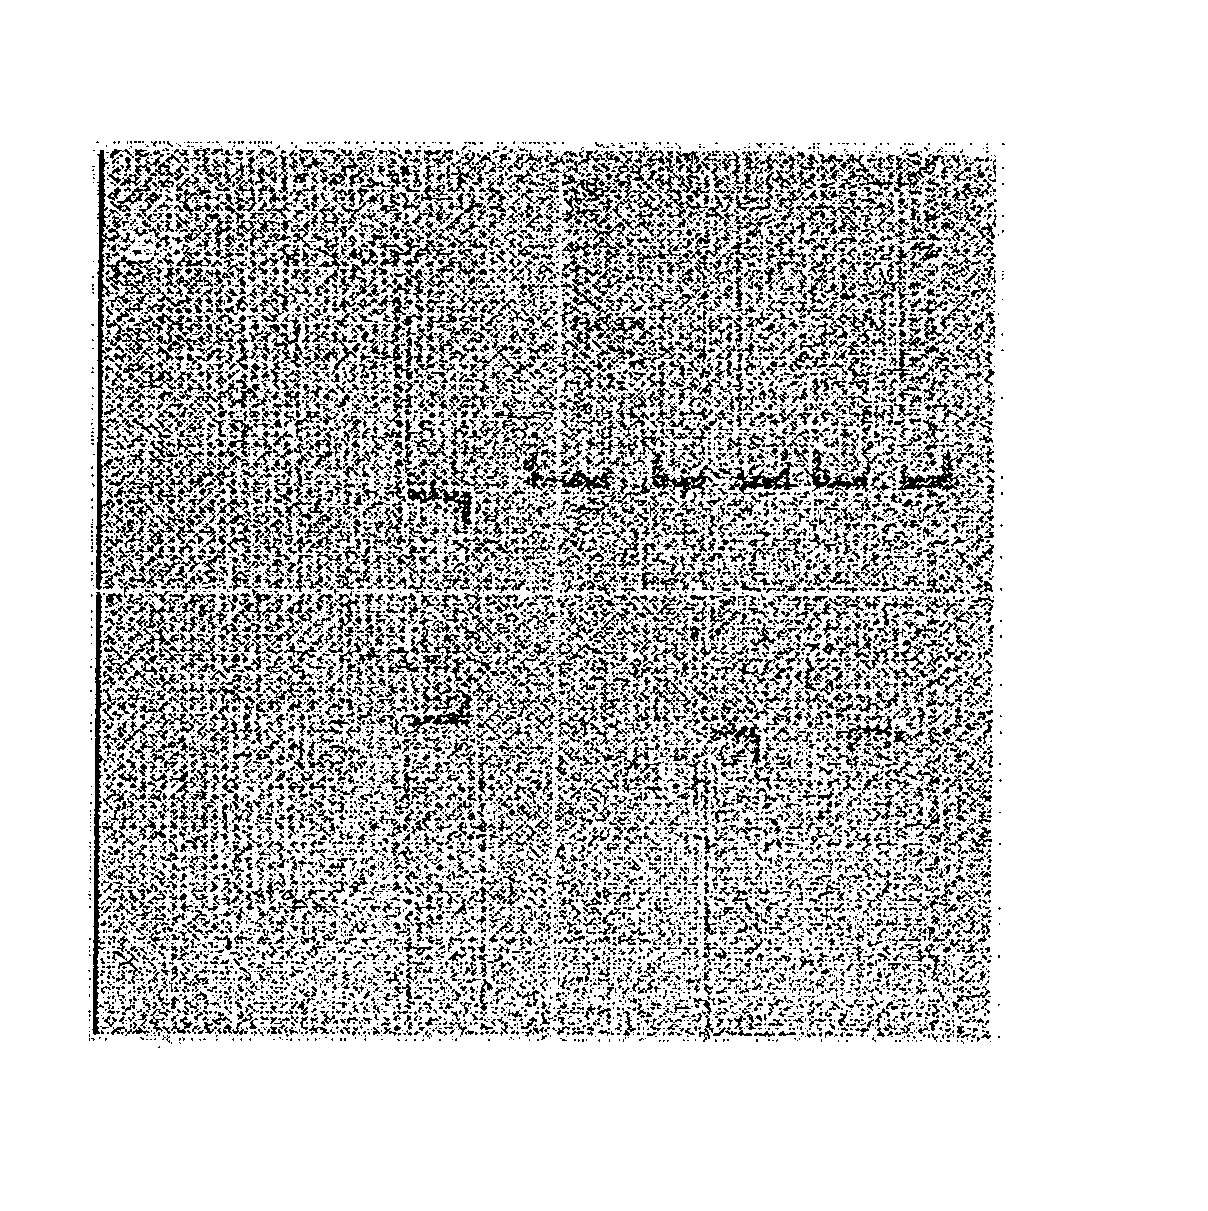 Organic anti-reflective coating composition and method for forming photoresist pattern using the same